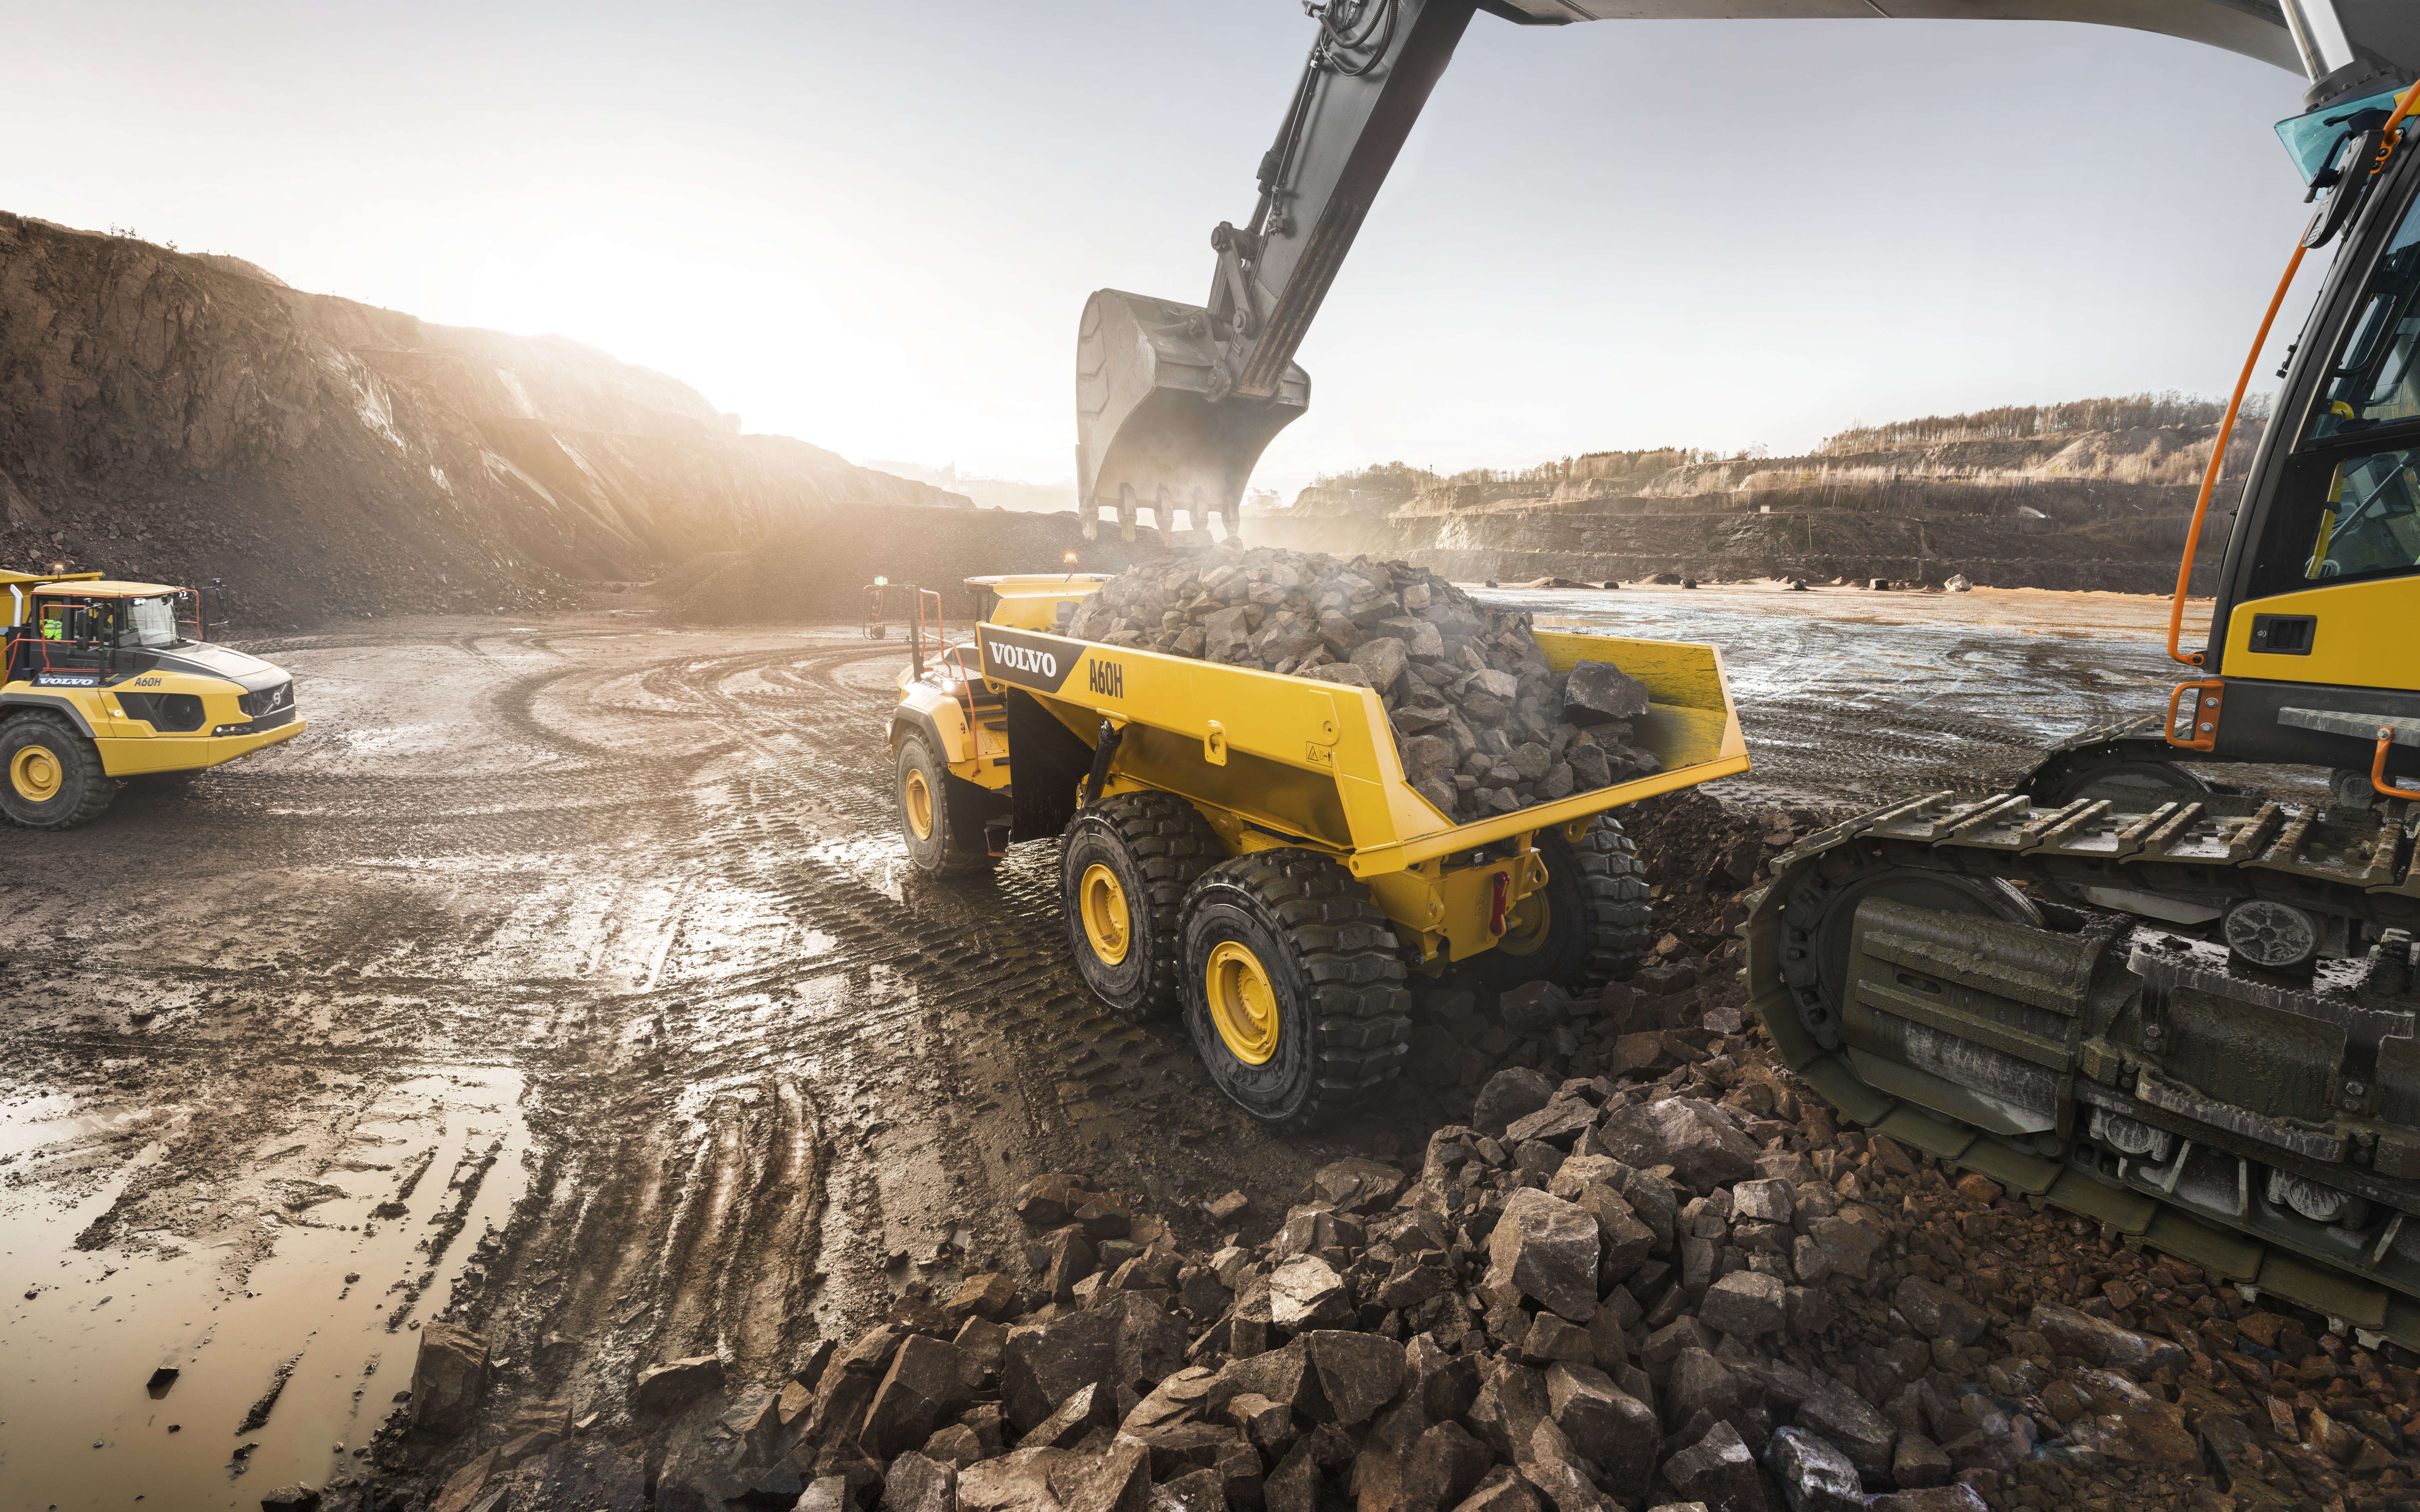 Download wallpaper Volvo A60H, Heavy duty dump truck, loading of stones, quarry, excavator, Swedish trucks, construction machinery, Volvo for desktop with resolution 7680x4800. High Quality HD picture wallpaper